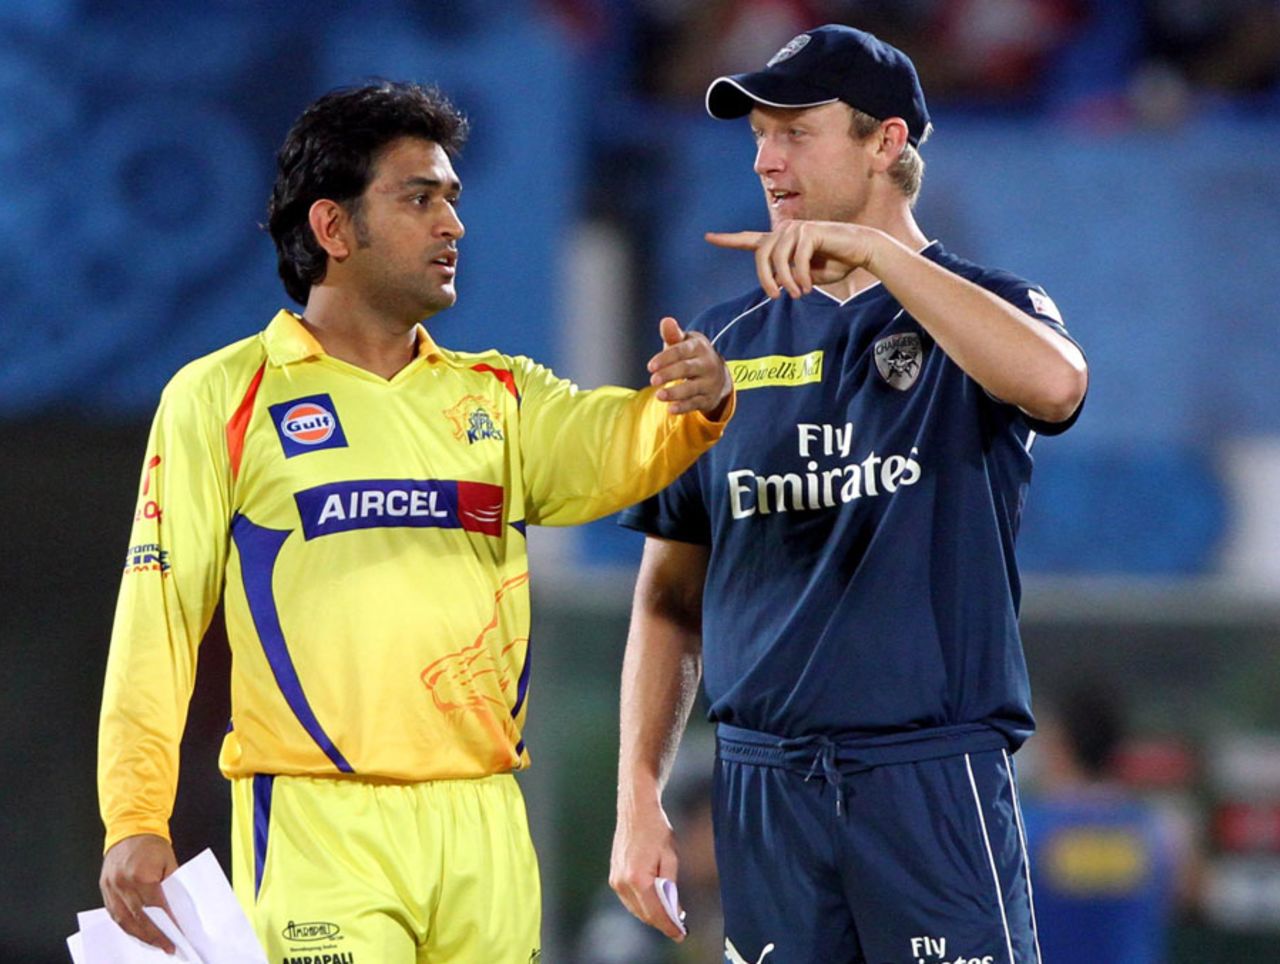 MS Dhoni and Cameron White talk before the toss, Deccan Chargers v Chennai Super Kings, IPL, Visakhapatnam, April 7, 2012